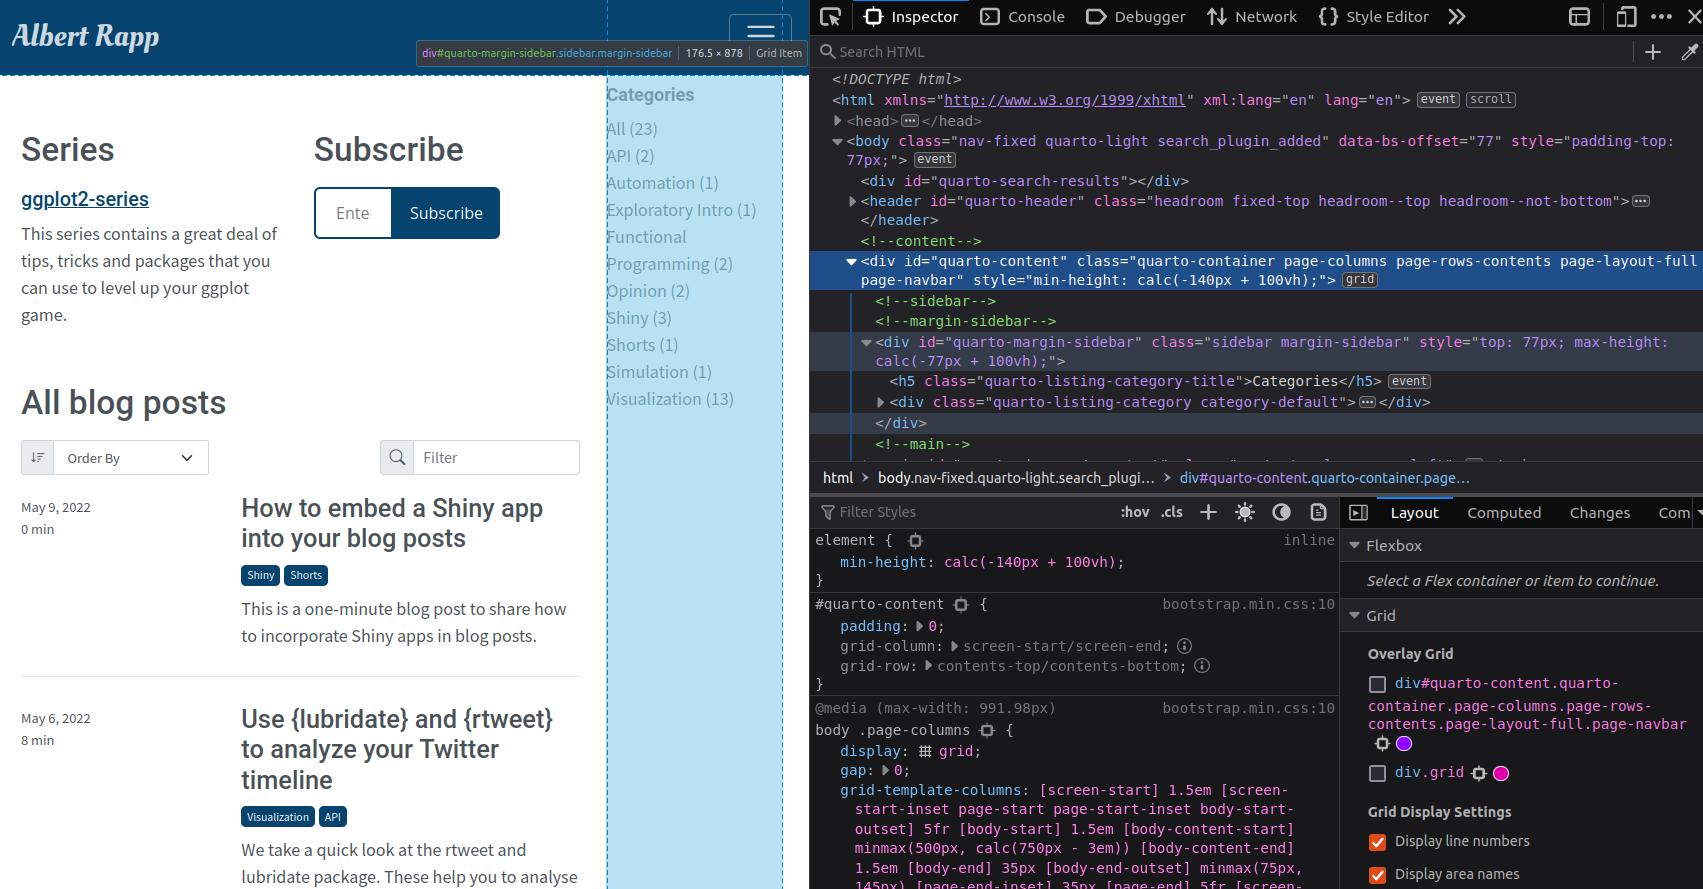 On the left you see the website you’ve opened. On the right you see the HTML- (top) and CSS-code (bottom). As you move your cursor through the HTML-code, your browser shows you the corresponding part of the website.